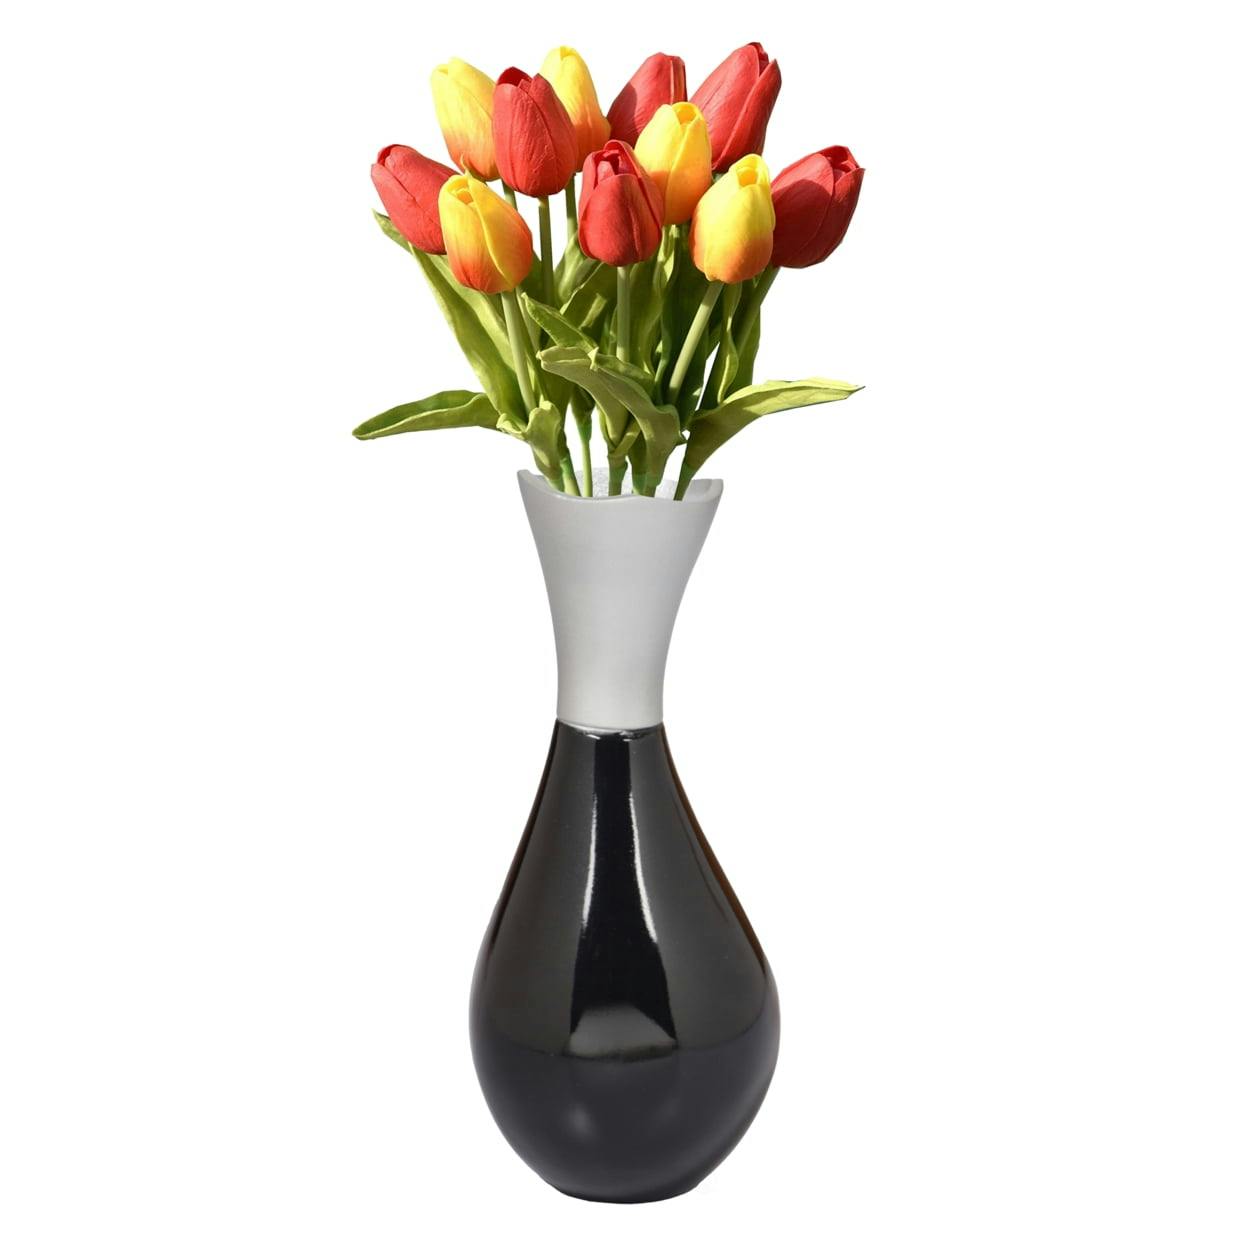 Aluminum-Casted Modern Decorative Flower Table Vase Duo